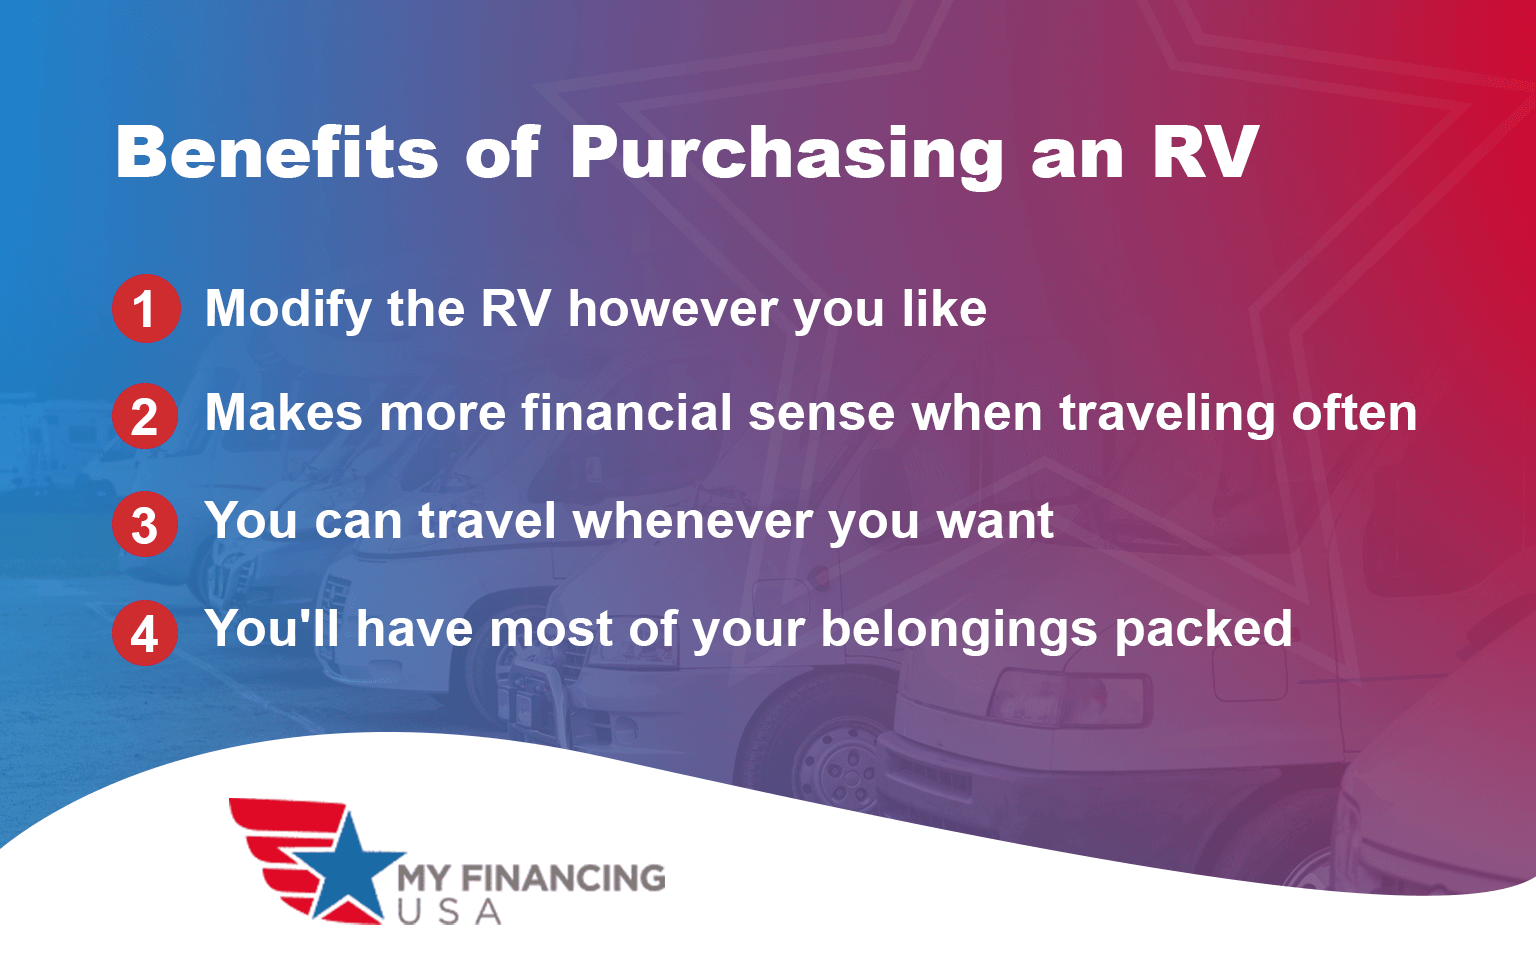 Benefits of purchasing an RV